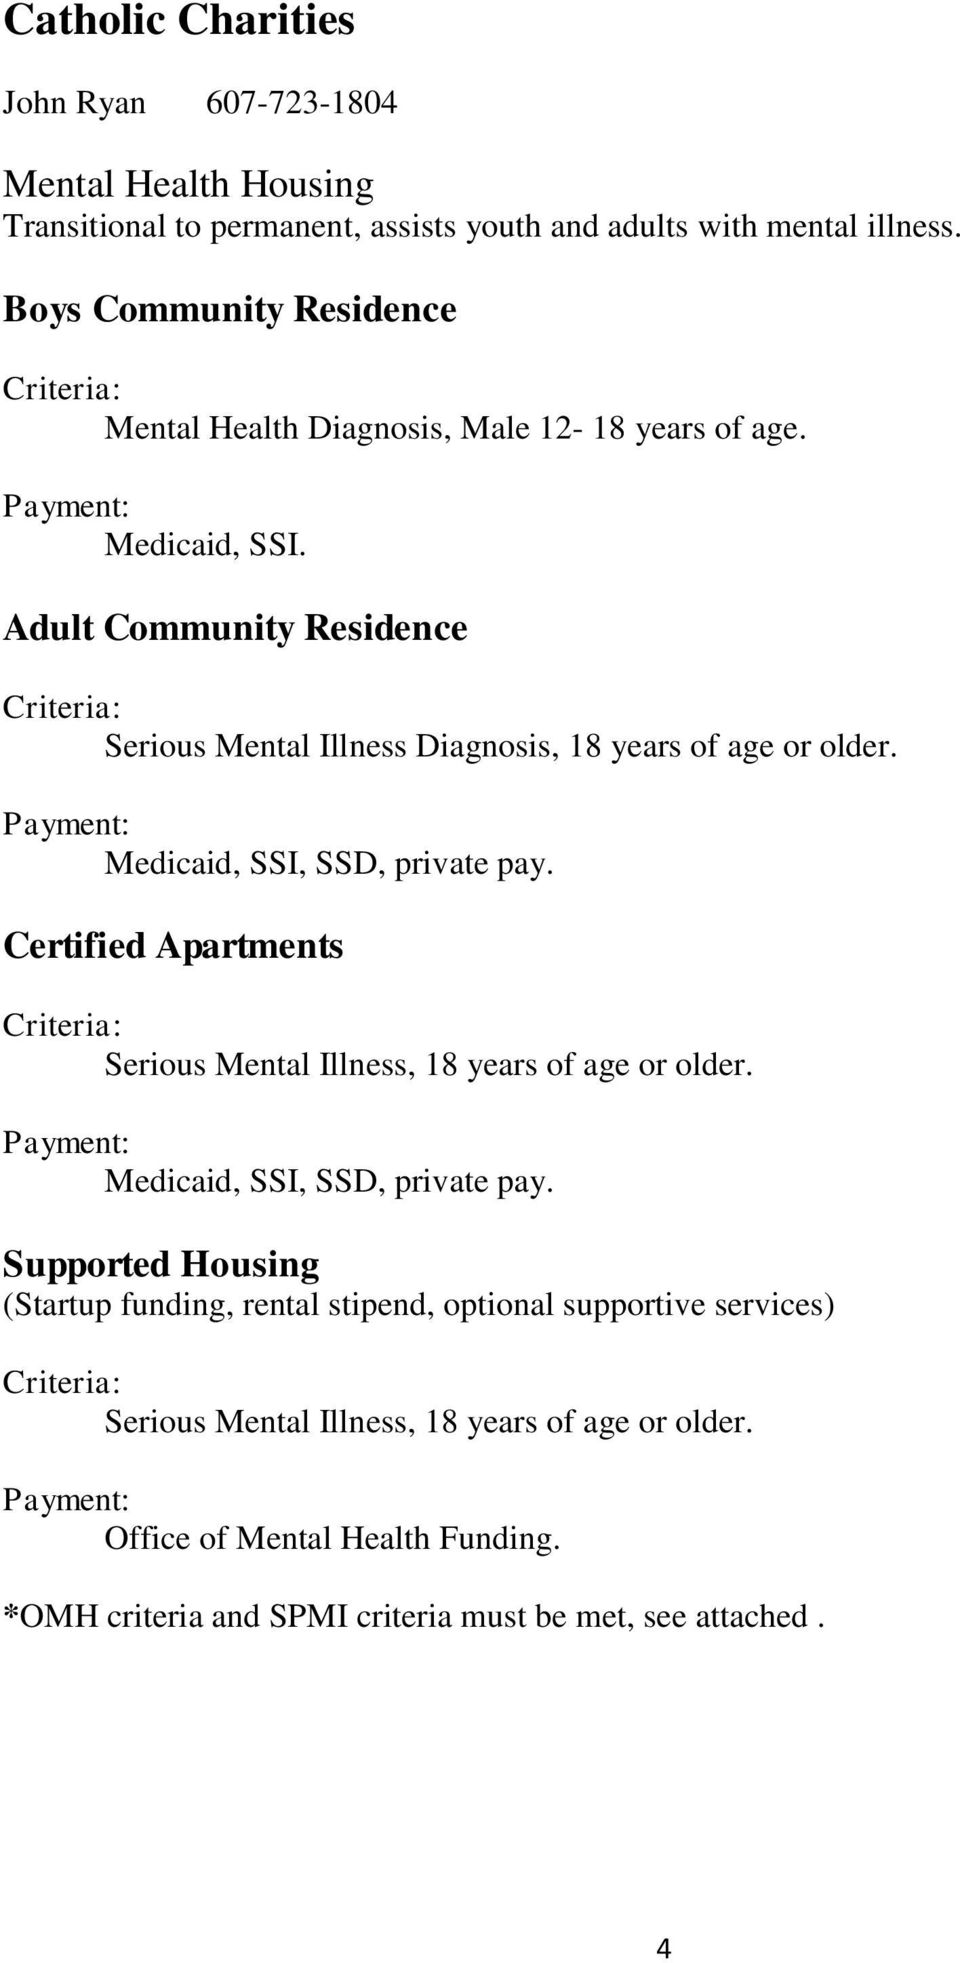 Adult Community Residence Serious Mental Illness Diagnosis, 18 years of age or older. Medicaid, SSI, SSD, private pay.